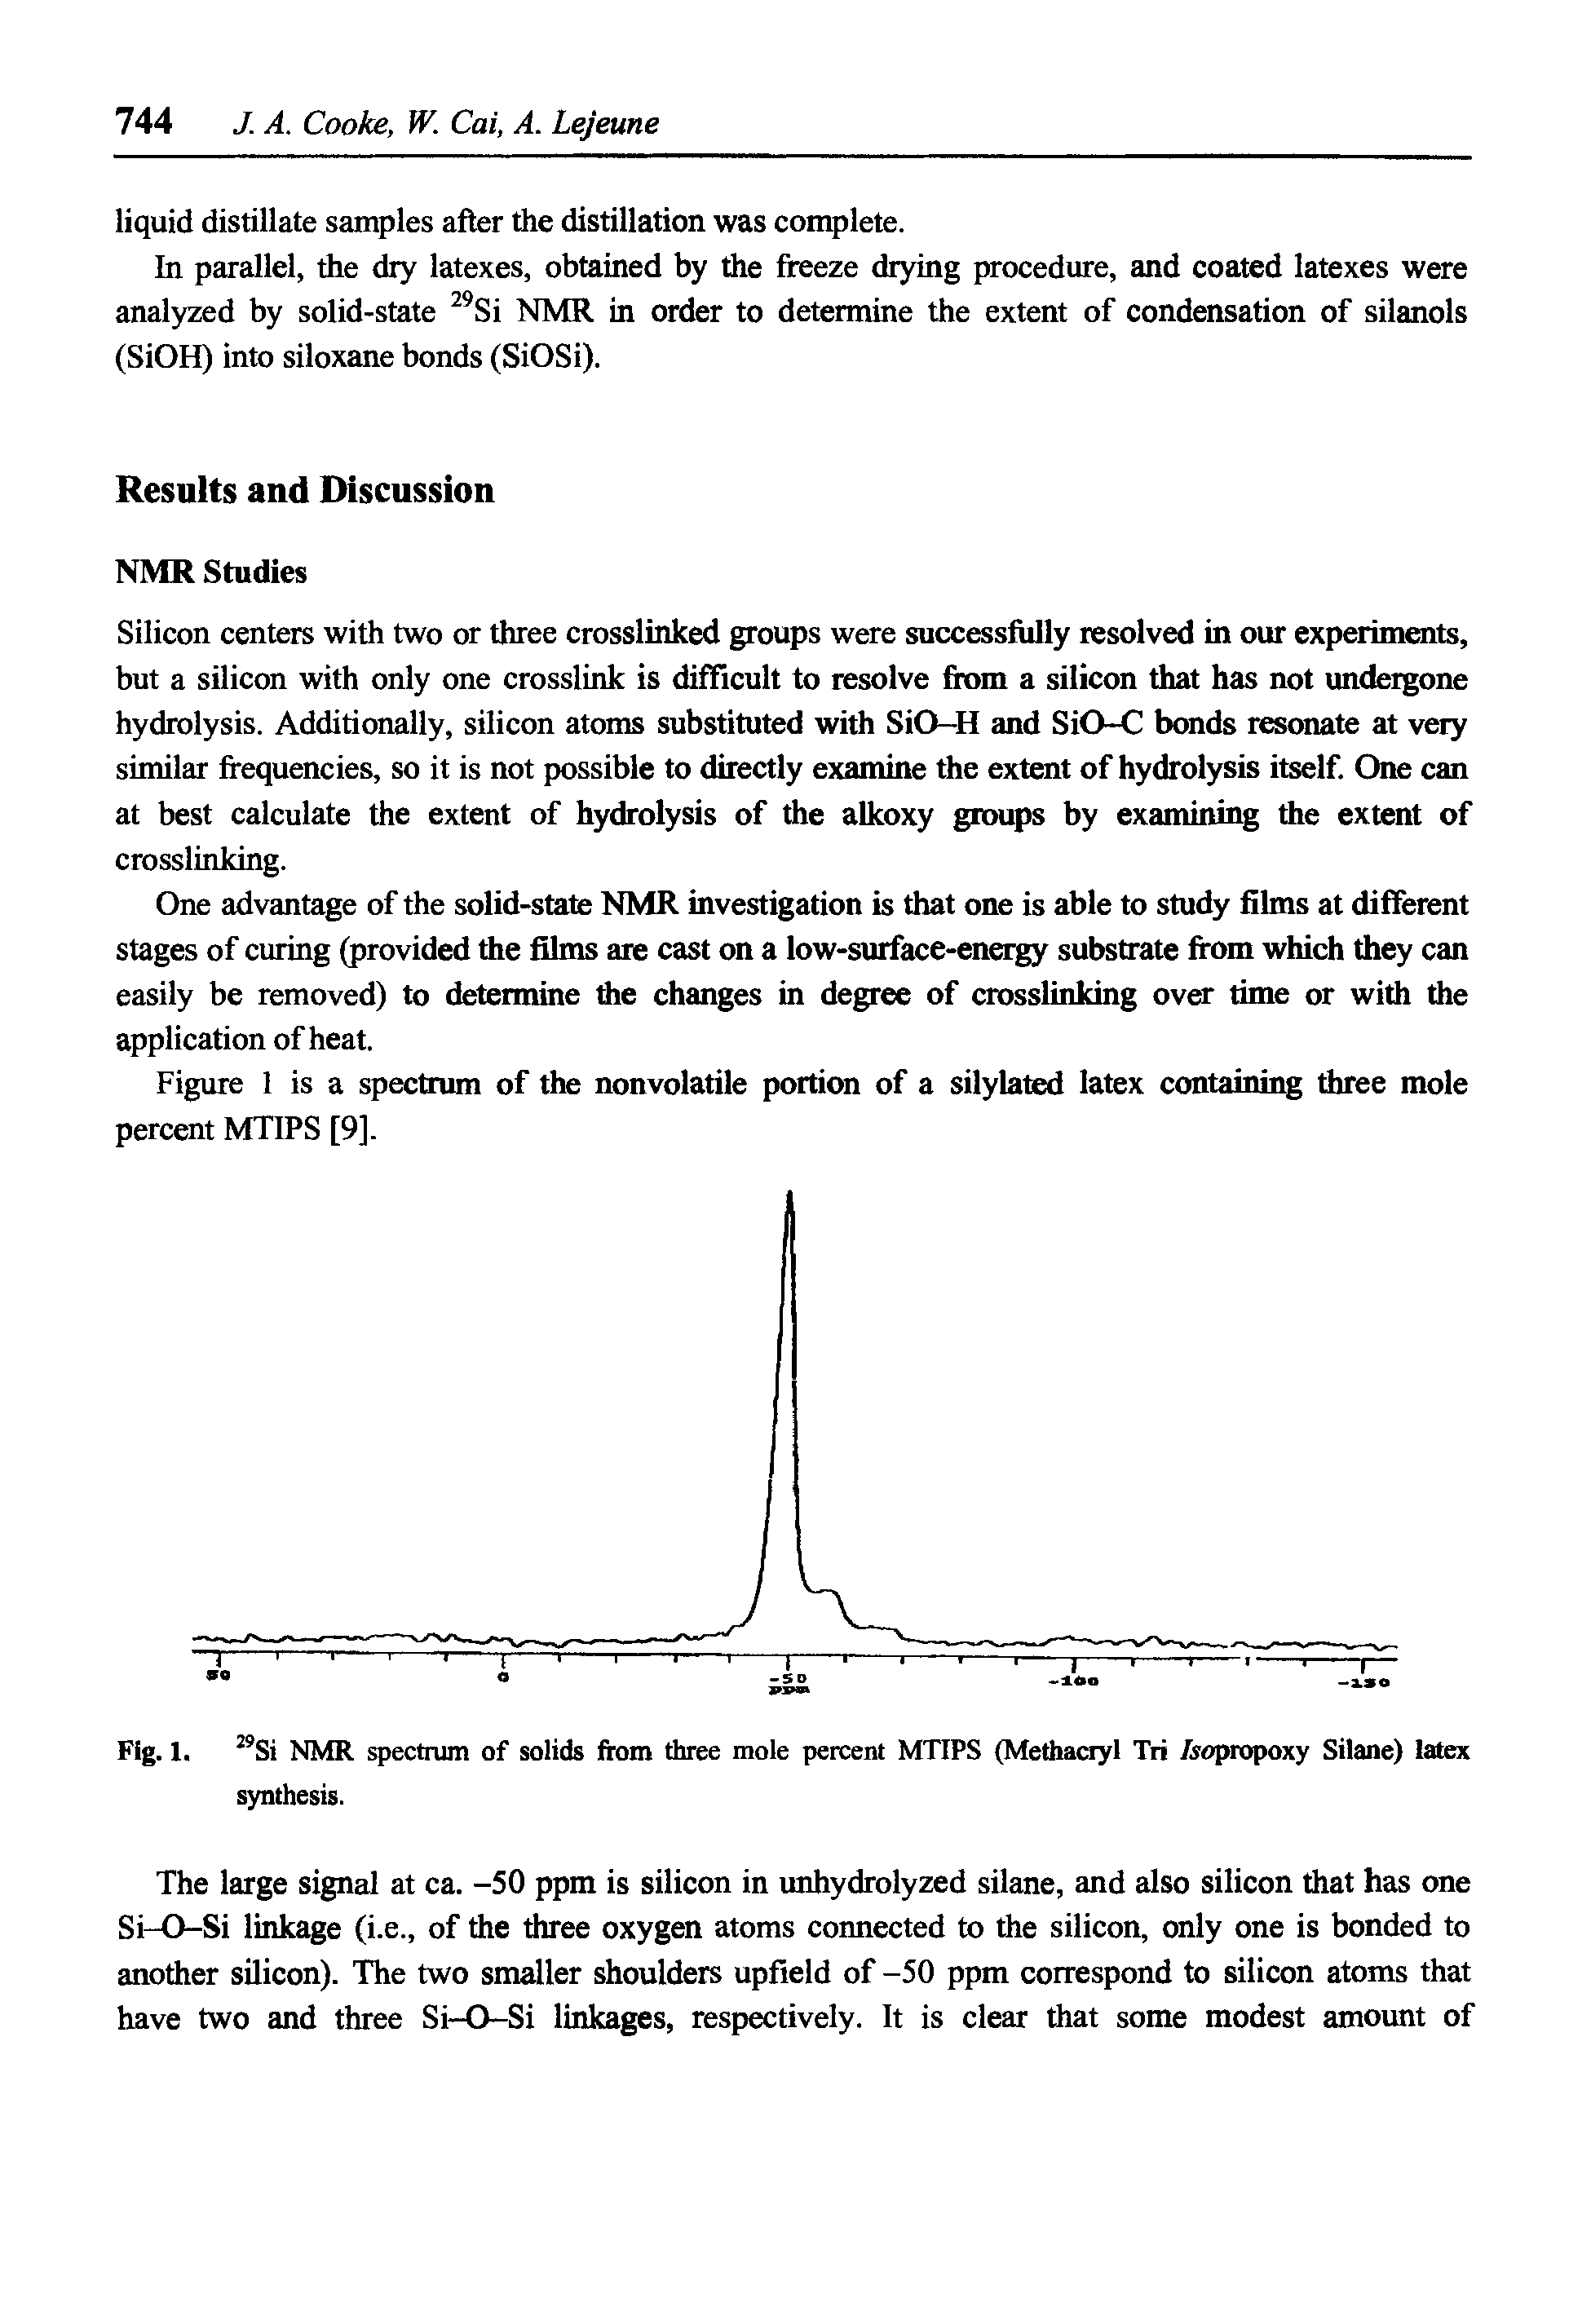 Fig. 1. Si NMR spectrum of solids from three mole percent MTIPS (Methaciyl Tri Aopropoxy Silane) latex synthesis.